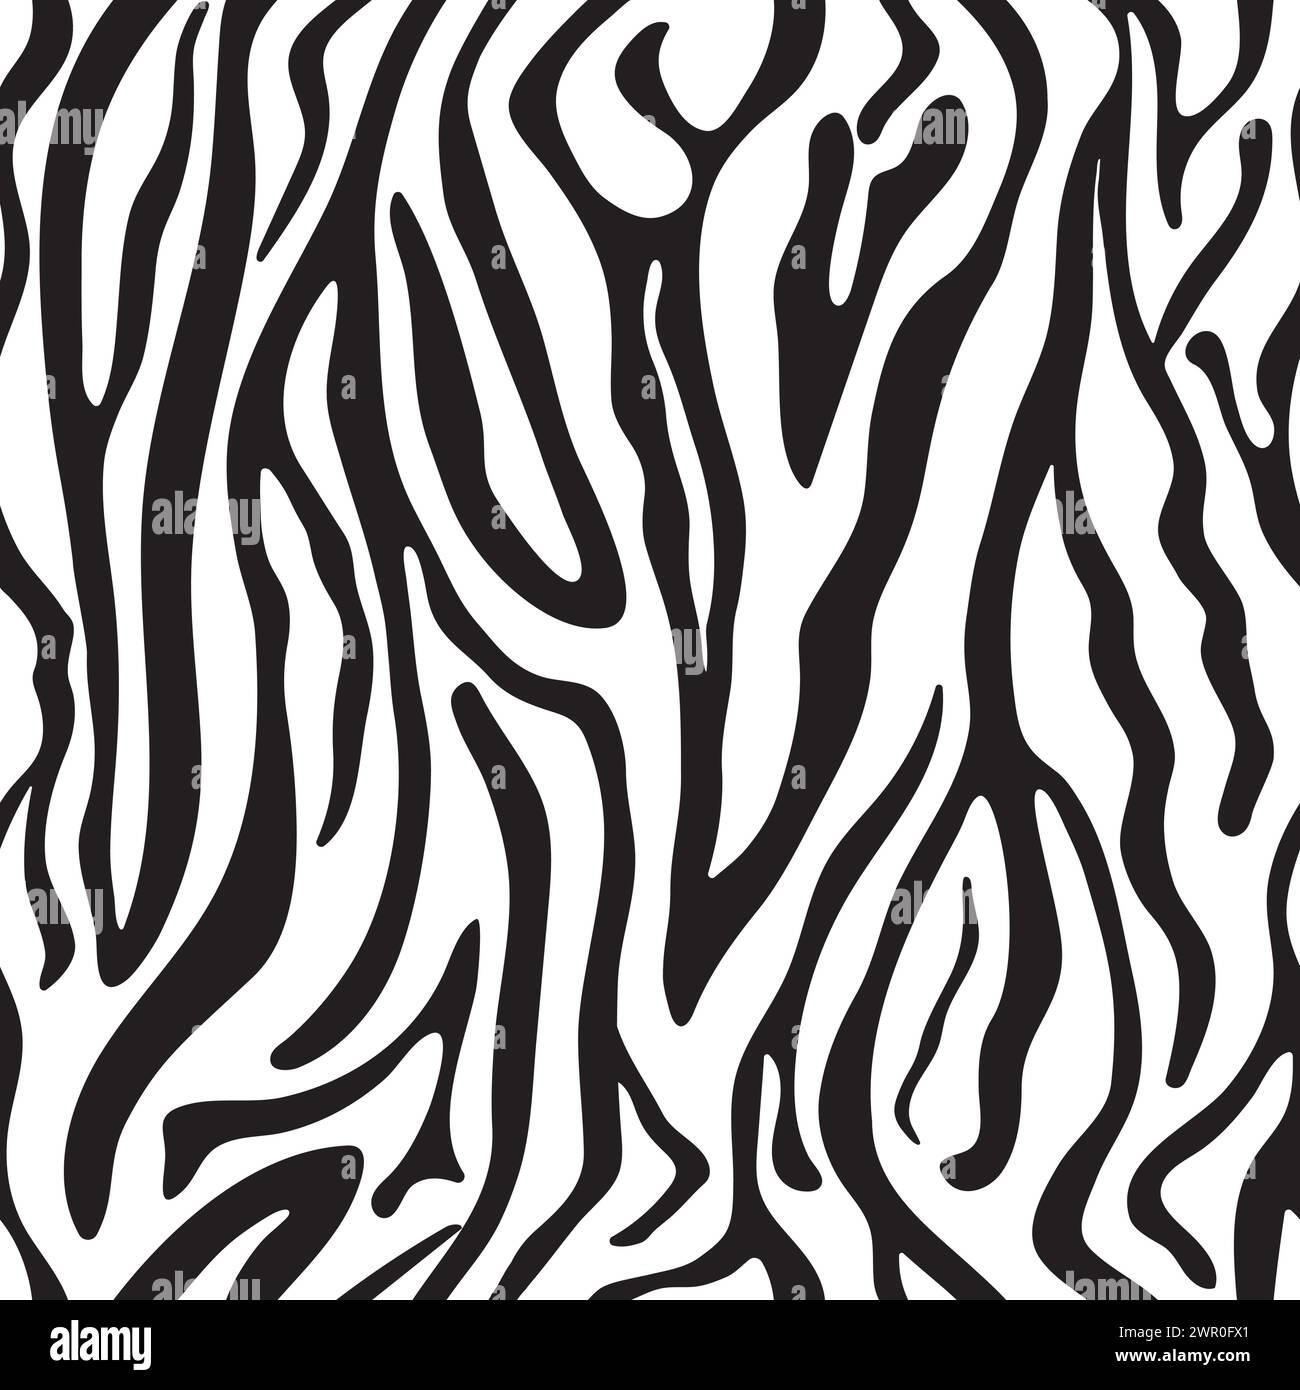 Zebra vector seamless pattern. Abstract black and white hand drawn zebra, tiger skin stripes repeat pattern background, wallpaper, textile design. Stock Vector